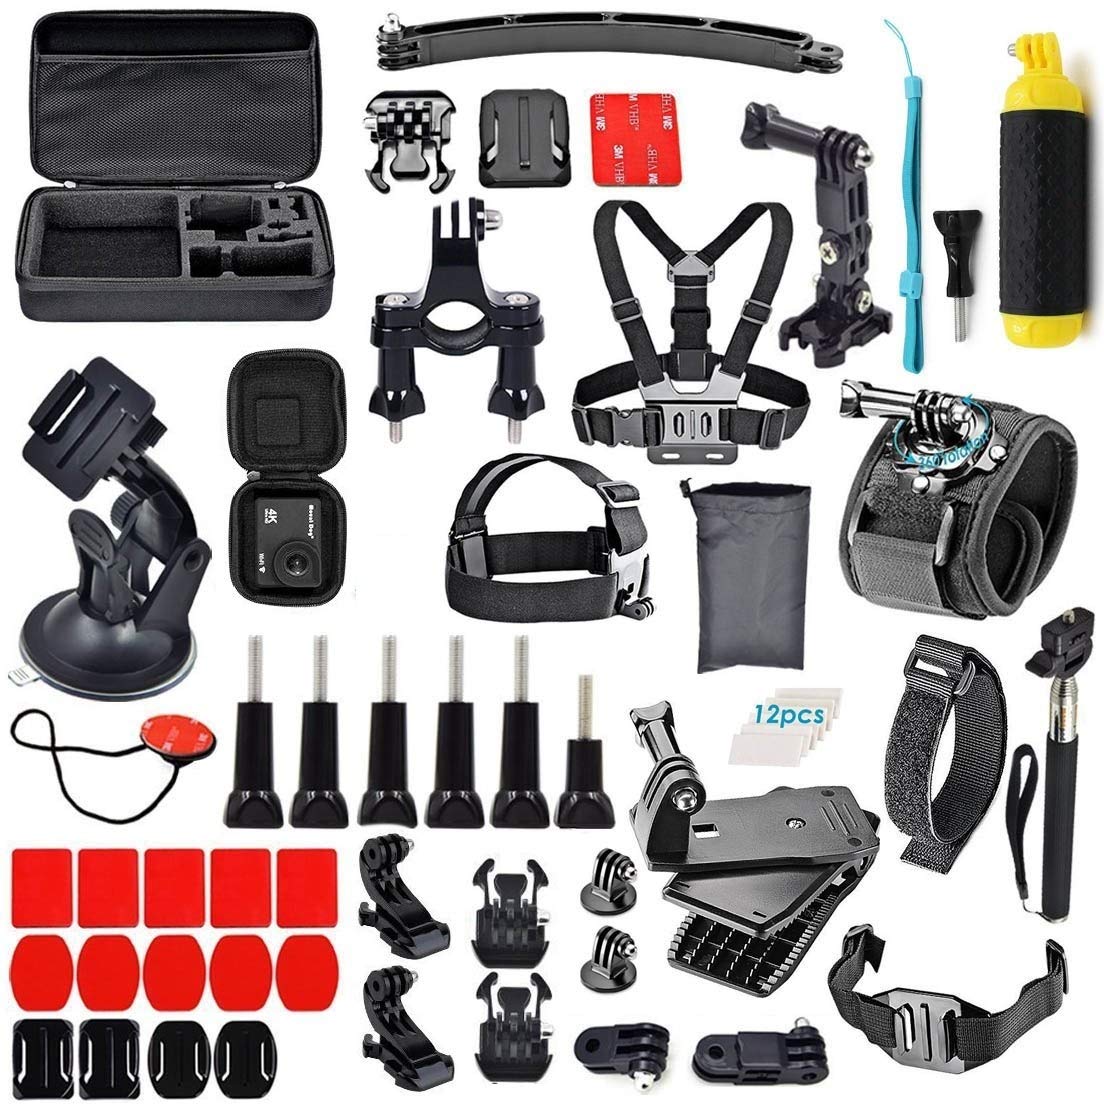 ADOFYS 61 in 1 Action Camera Accessories Kit Compatible for GoPro, Sony Action C